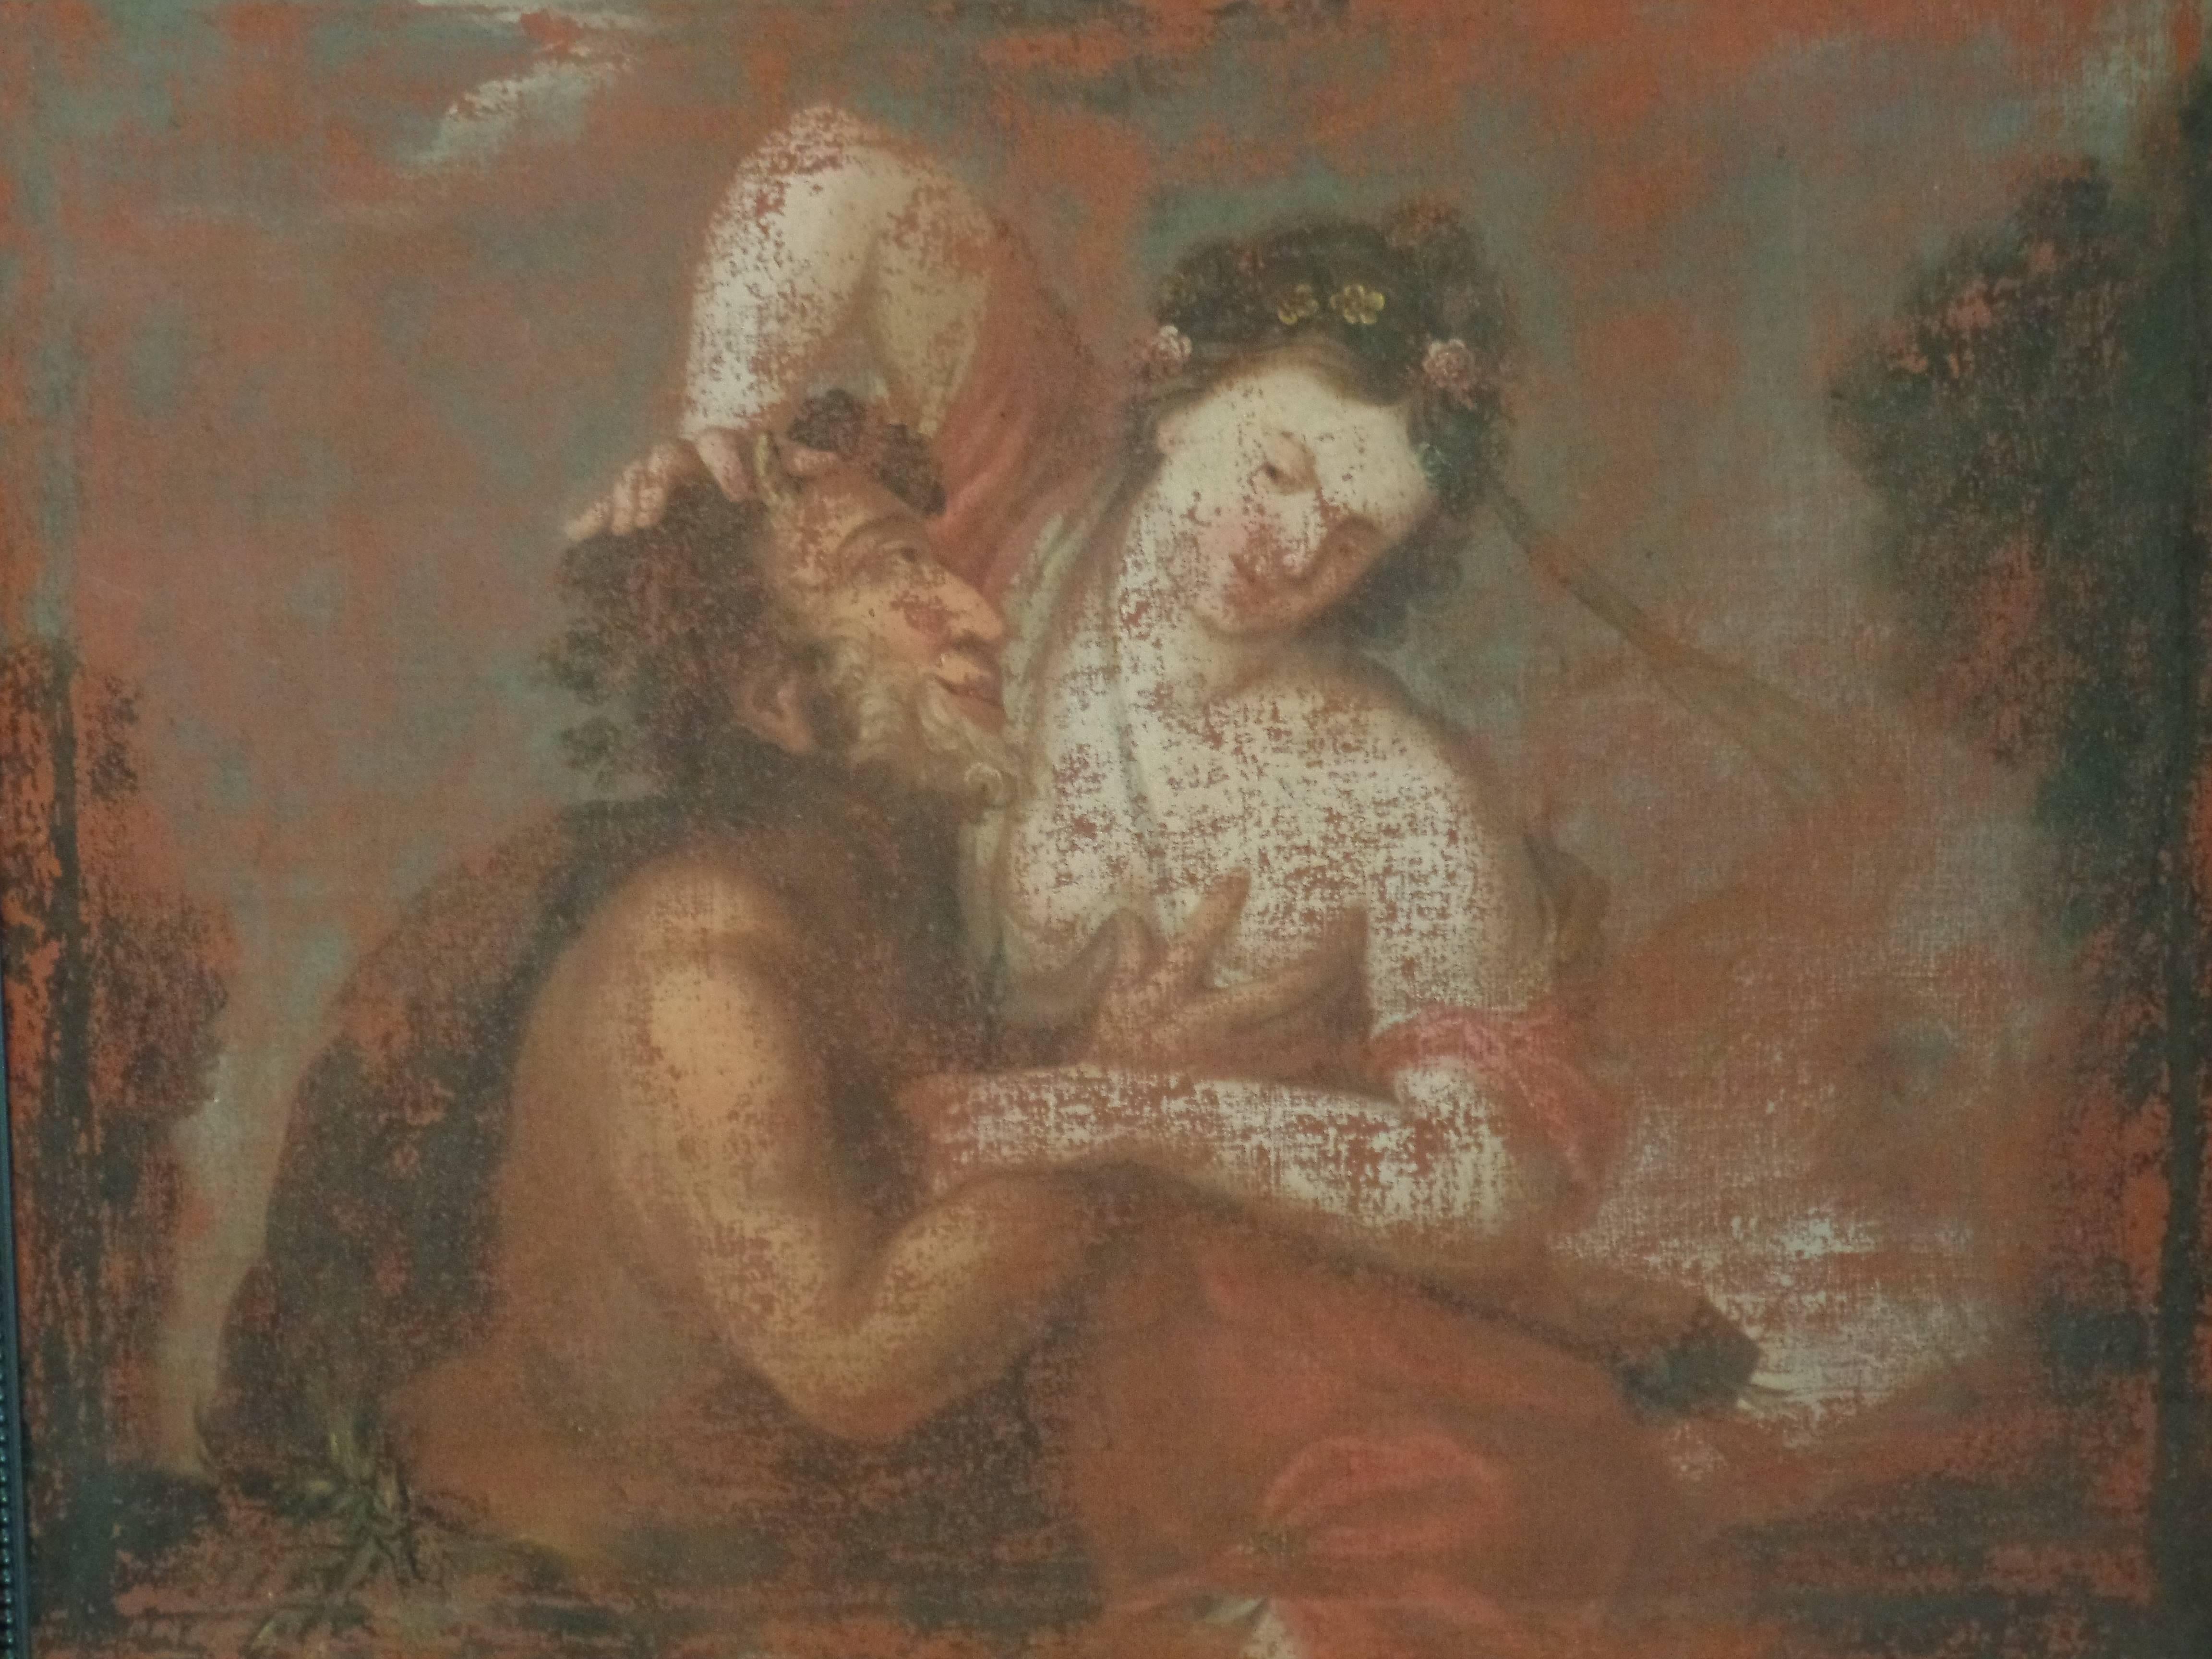 Oil on canvas, mythological painting of Satyr (pan depicted with goat horns) and woman portraying the Classic eternal theme of Eros and the struggle against it.

European (Italian or French), 17th century. Although the work has loss of paint, it